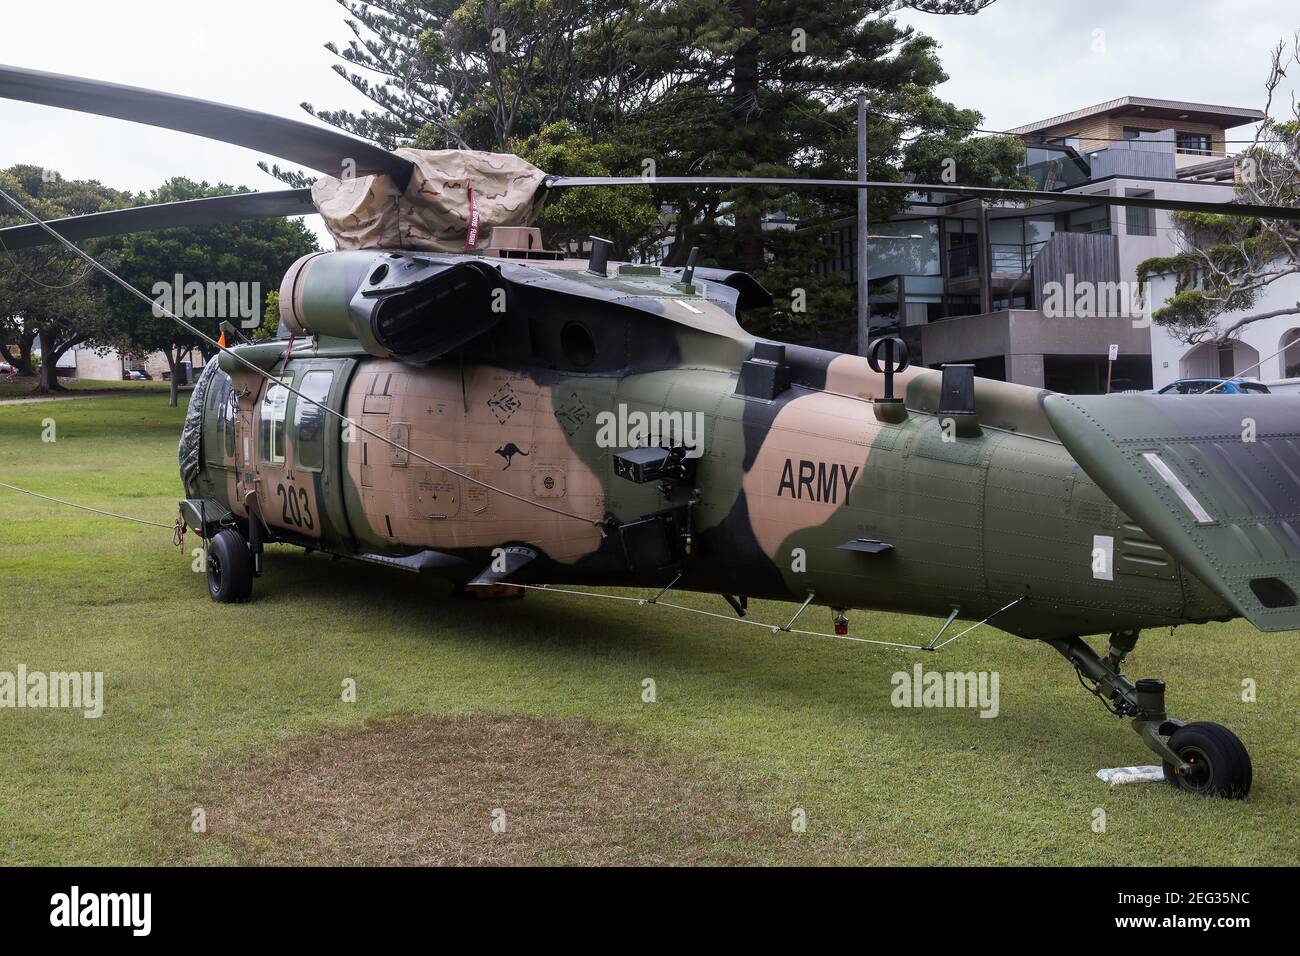 Sydney, Australia. Thursday 18th February 2021. A Black Hawk helicopter is down in Robertson Park, Watson's Bay  in Sydney's eastern suburbs, after having to make an emergency landing. The special forces helicopter came into contact with a ship during an anti-terrorism exercise on Sydney Harbour. Credit Paul Lovelace/Alamy Live News Stock Photo